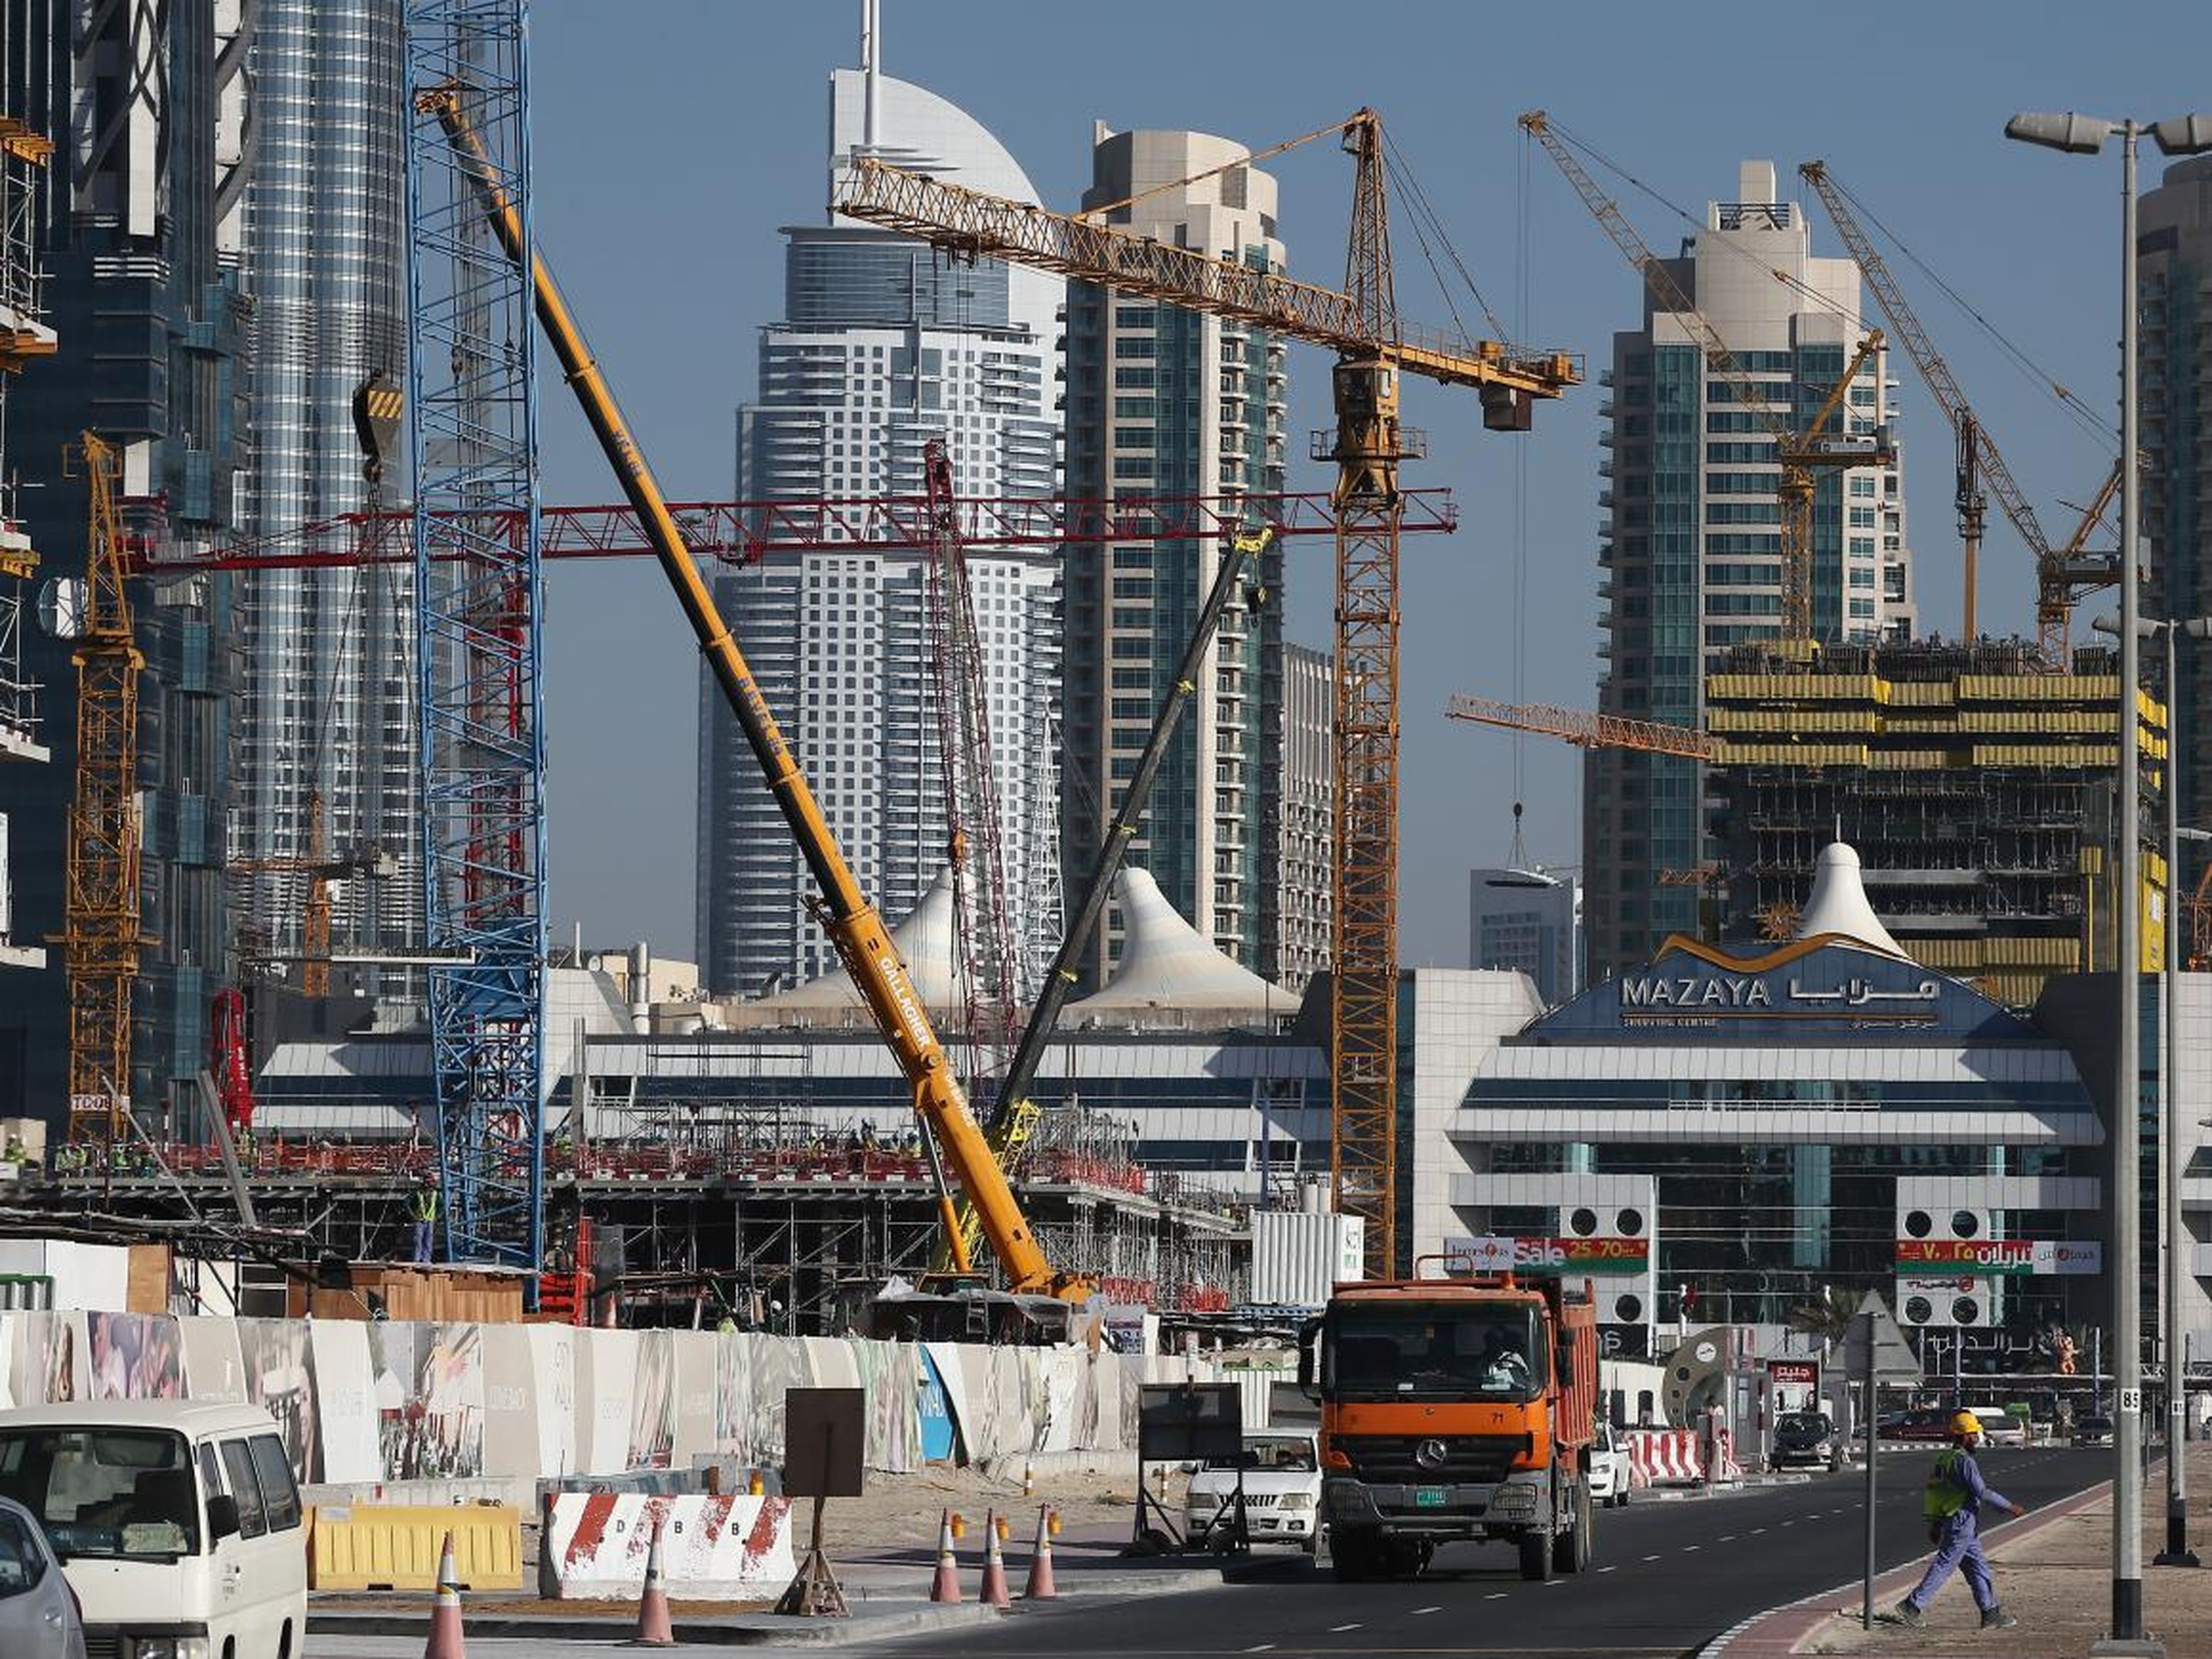 But many visitors to Dubai find it to be completely underwhelming, artificial, and lacking in culture. Foreigners who live there complain of constant construction, and it's landed on several lists of most overrated travel